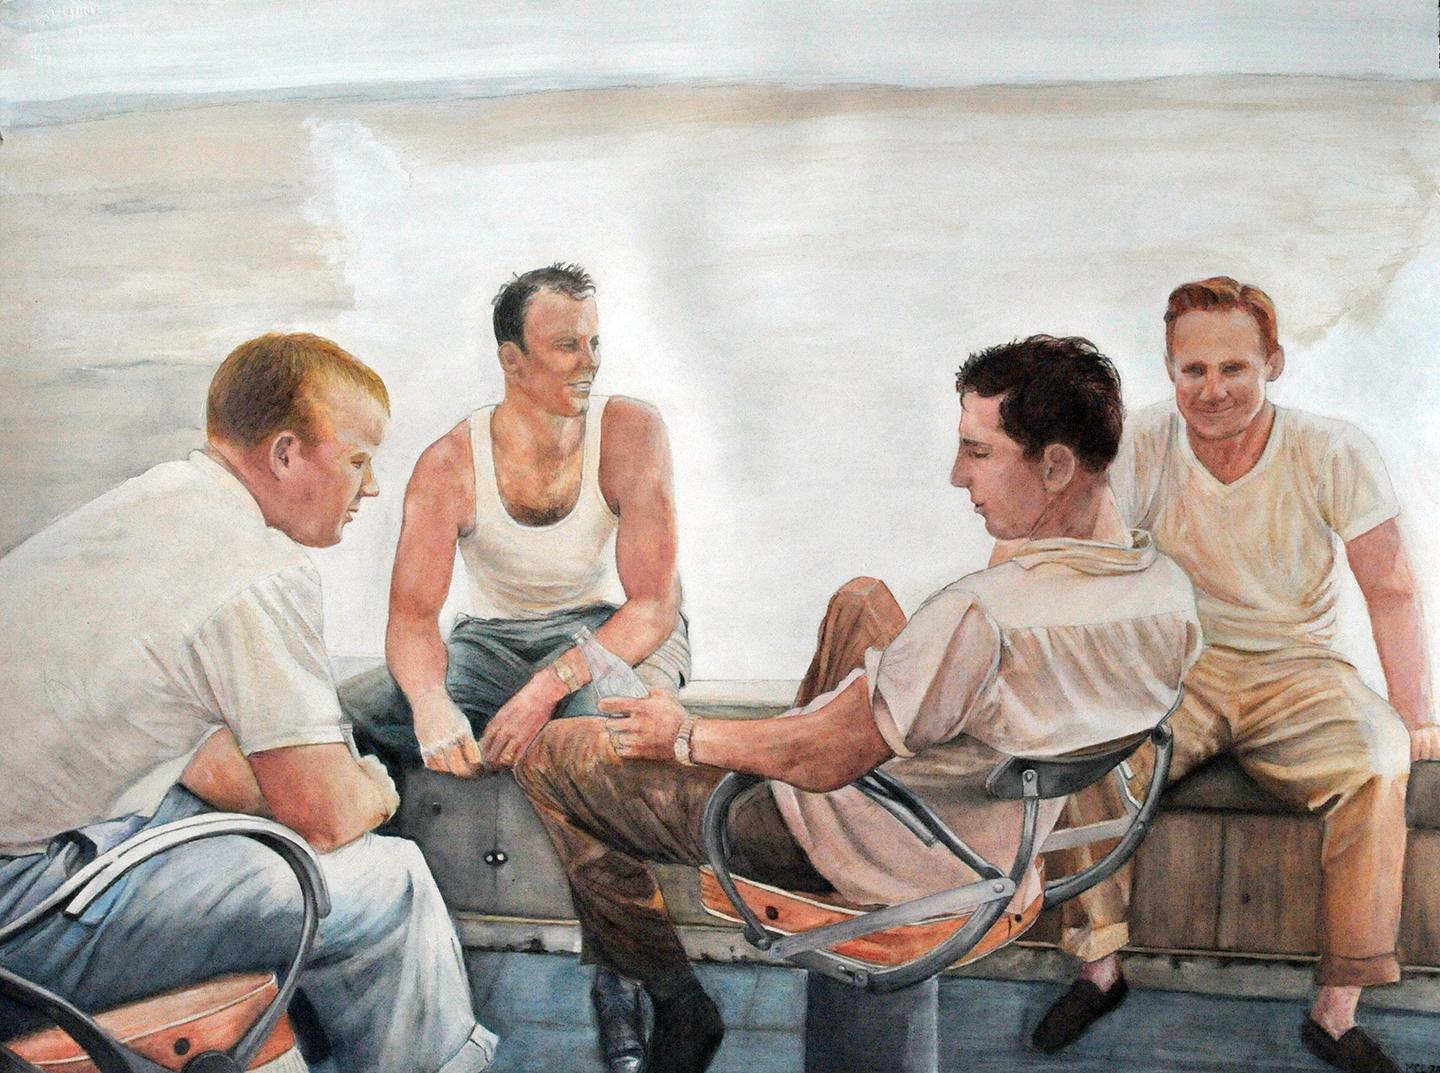 Margie Lawrence Figurative Painting - Yankees Spring Training 1957 - Baseball Greats, Mantle, Grimm, Martin, Ford